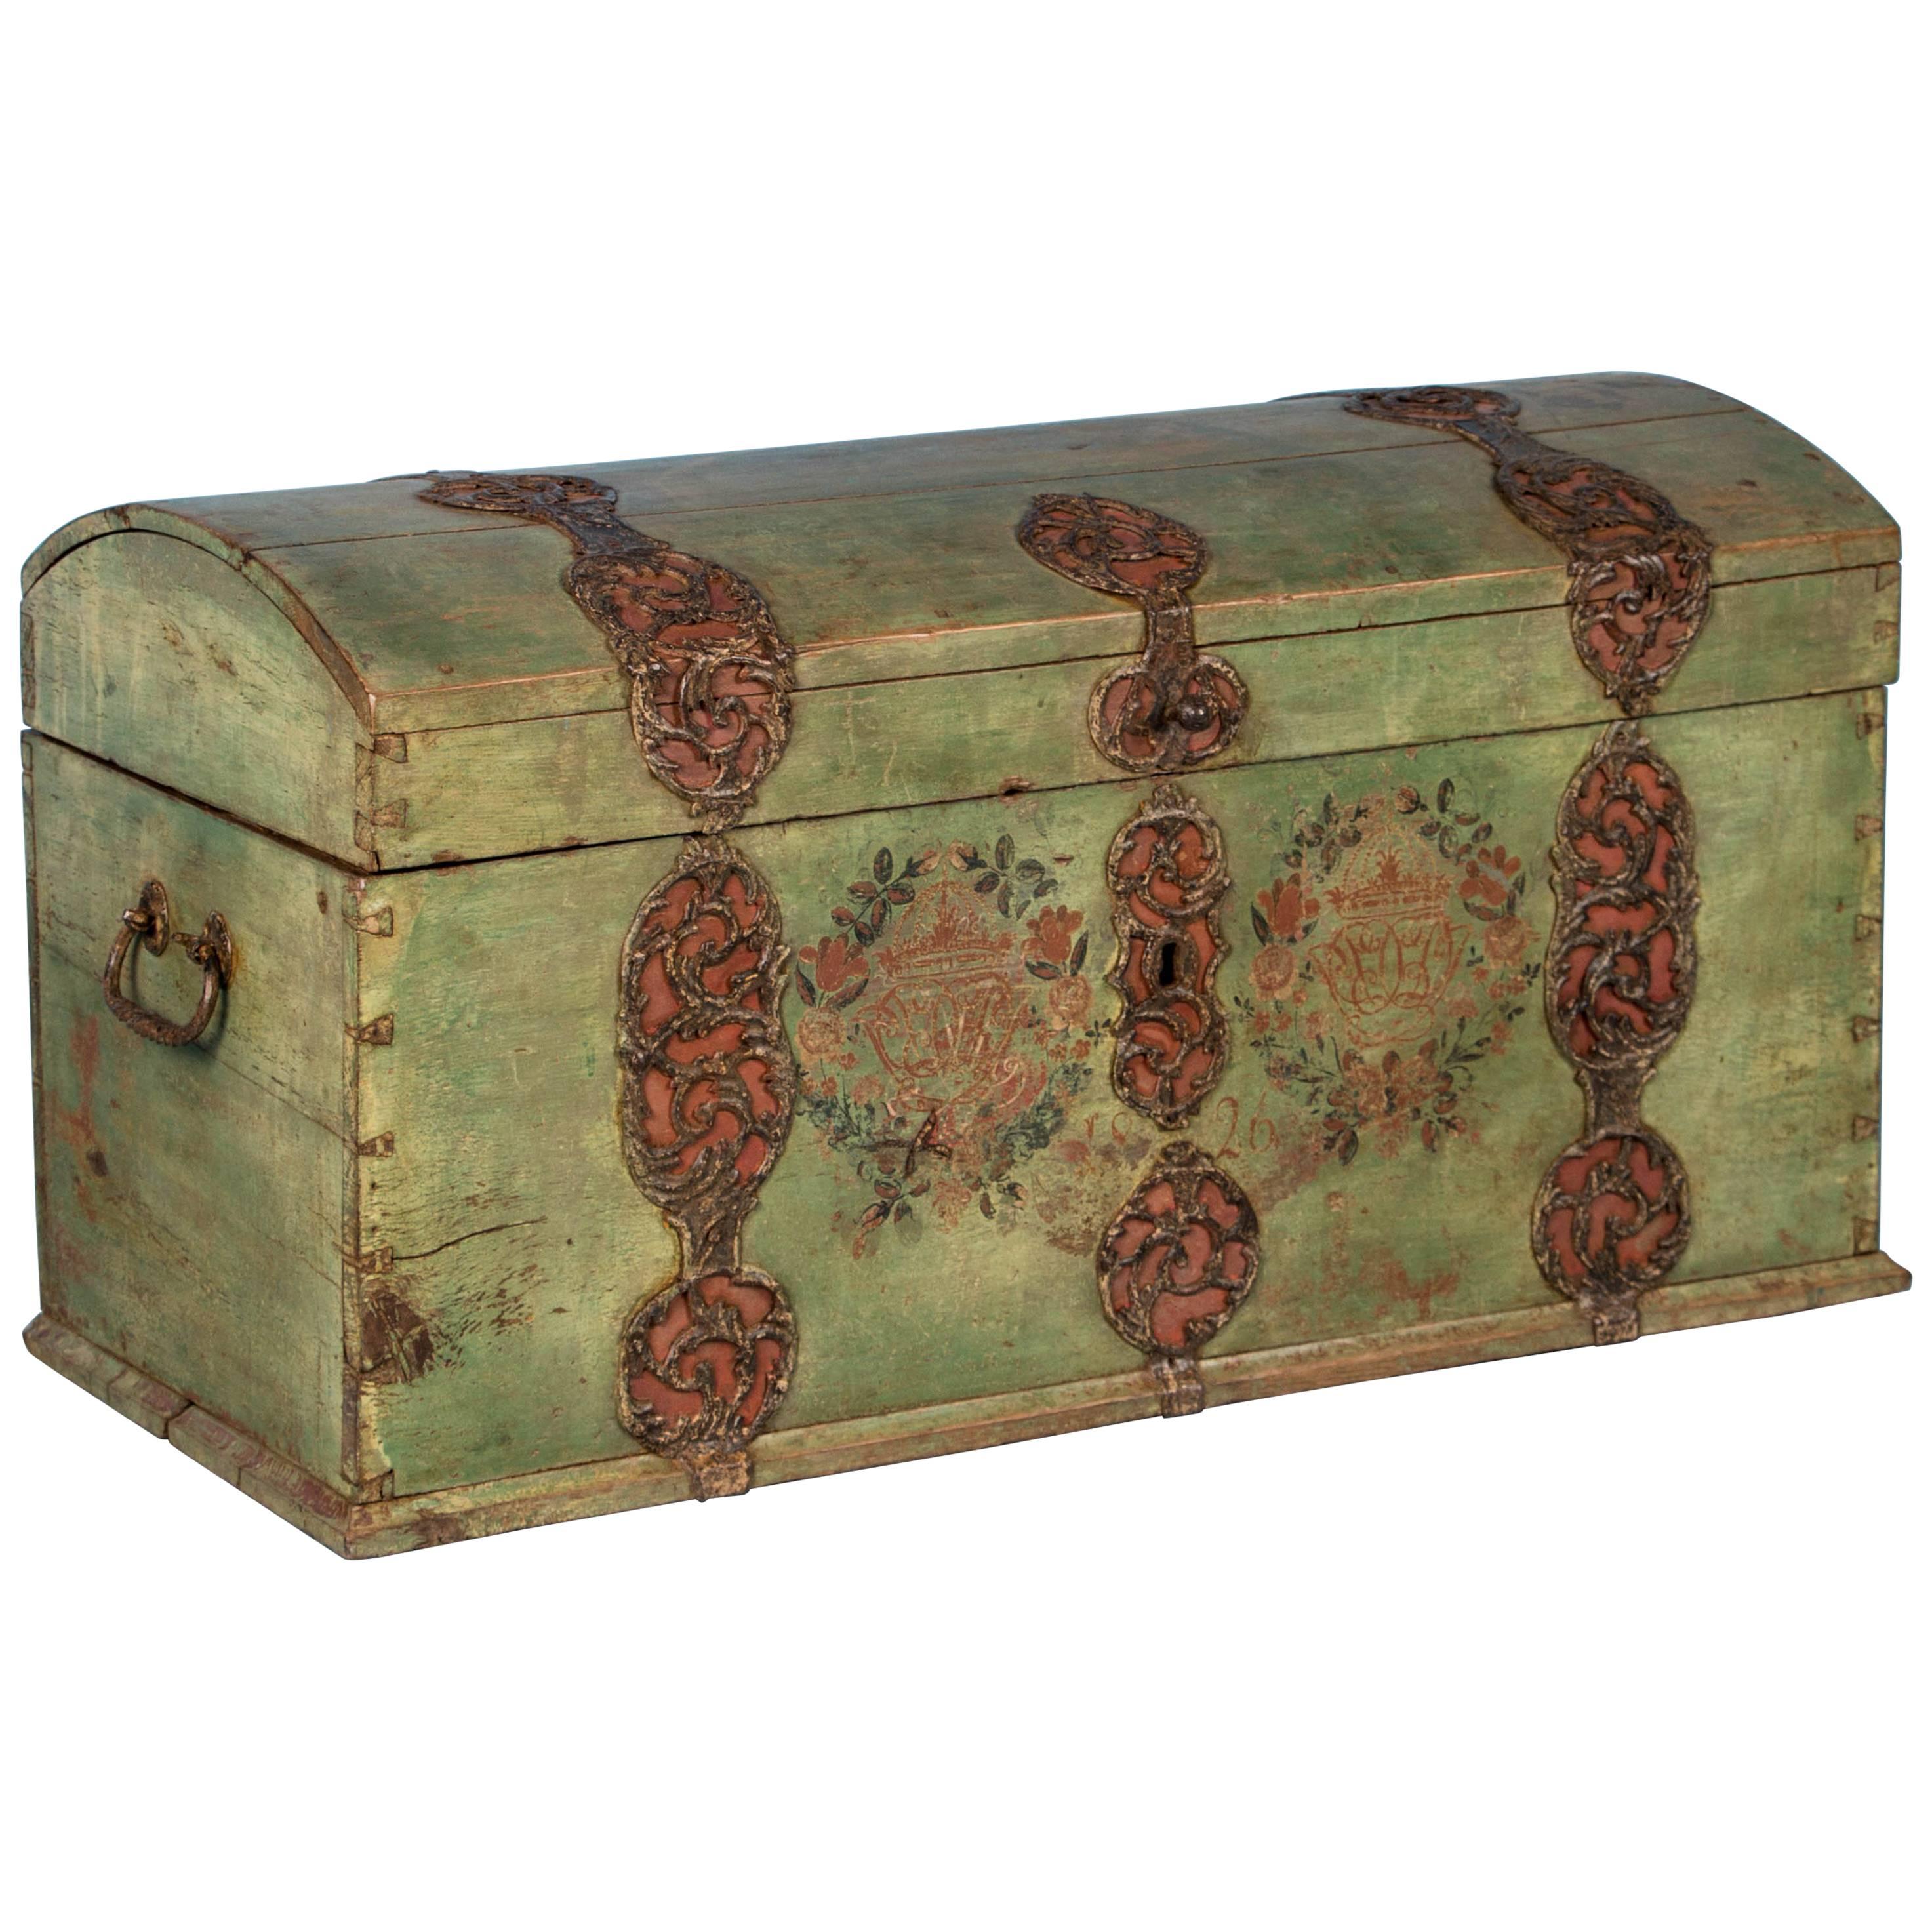 Antique Swedish Dome Top Trunk with Original Green Paint